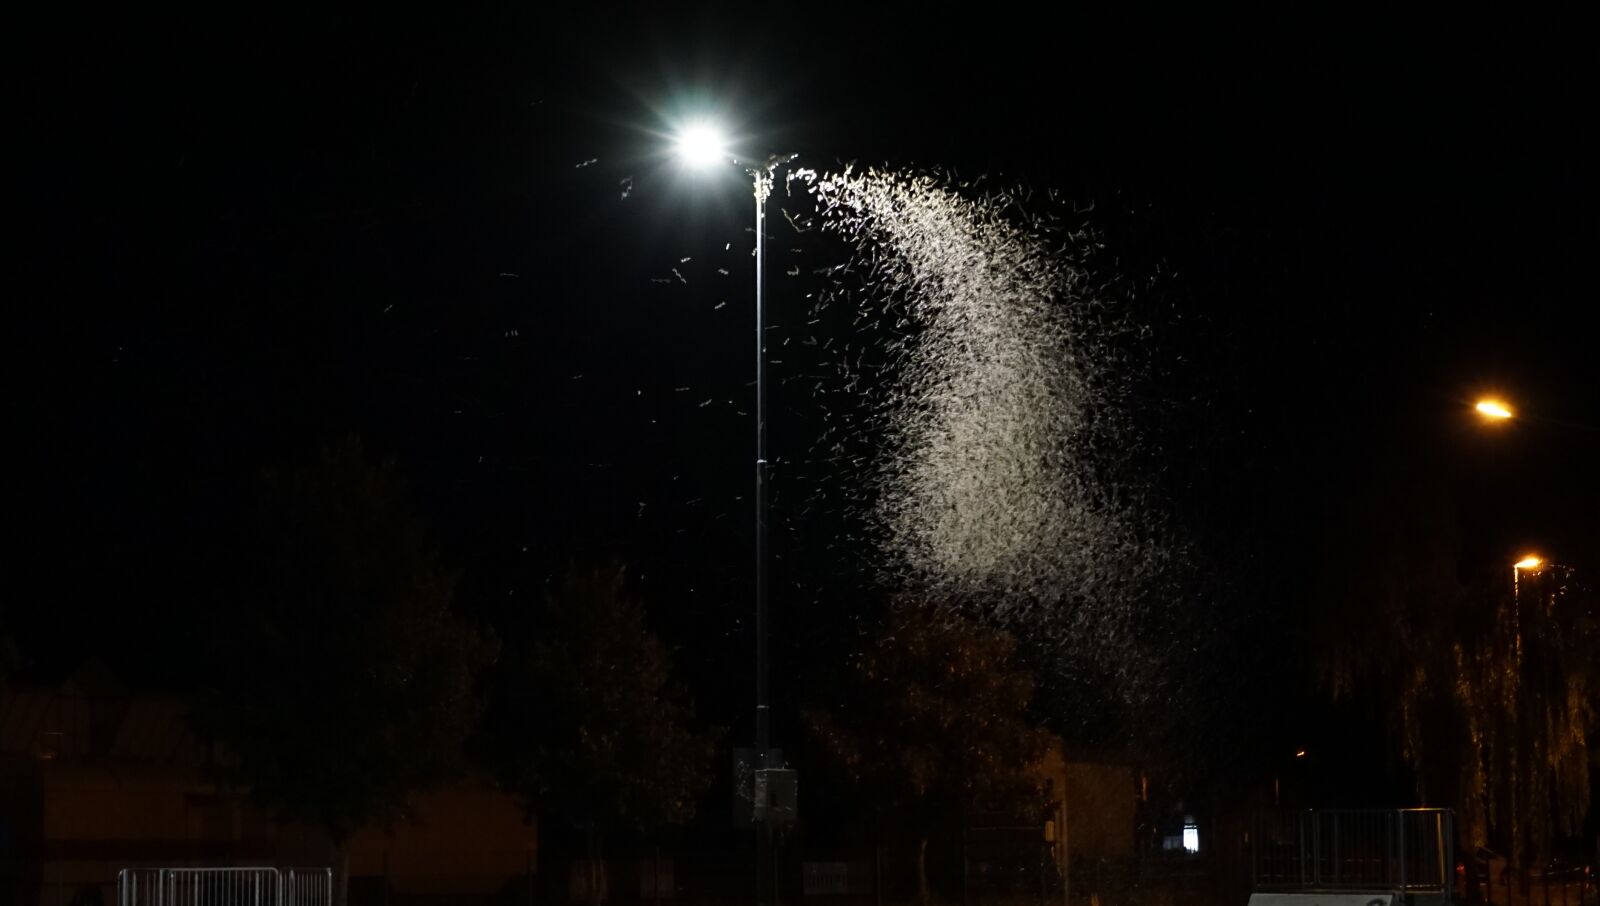 Sony a6000 sample photo. Insect, dance, night photography